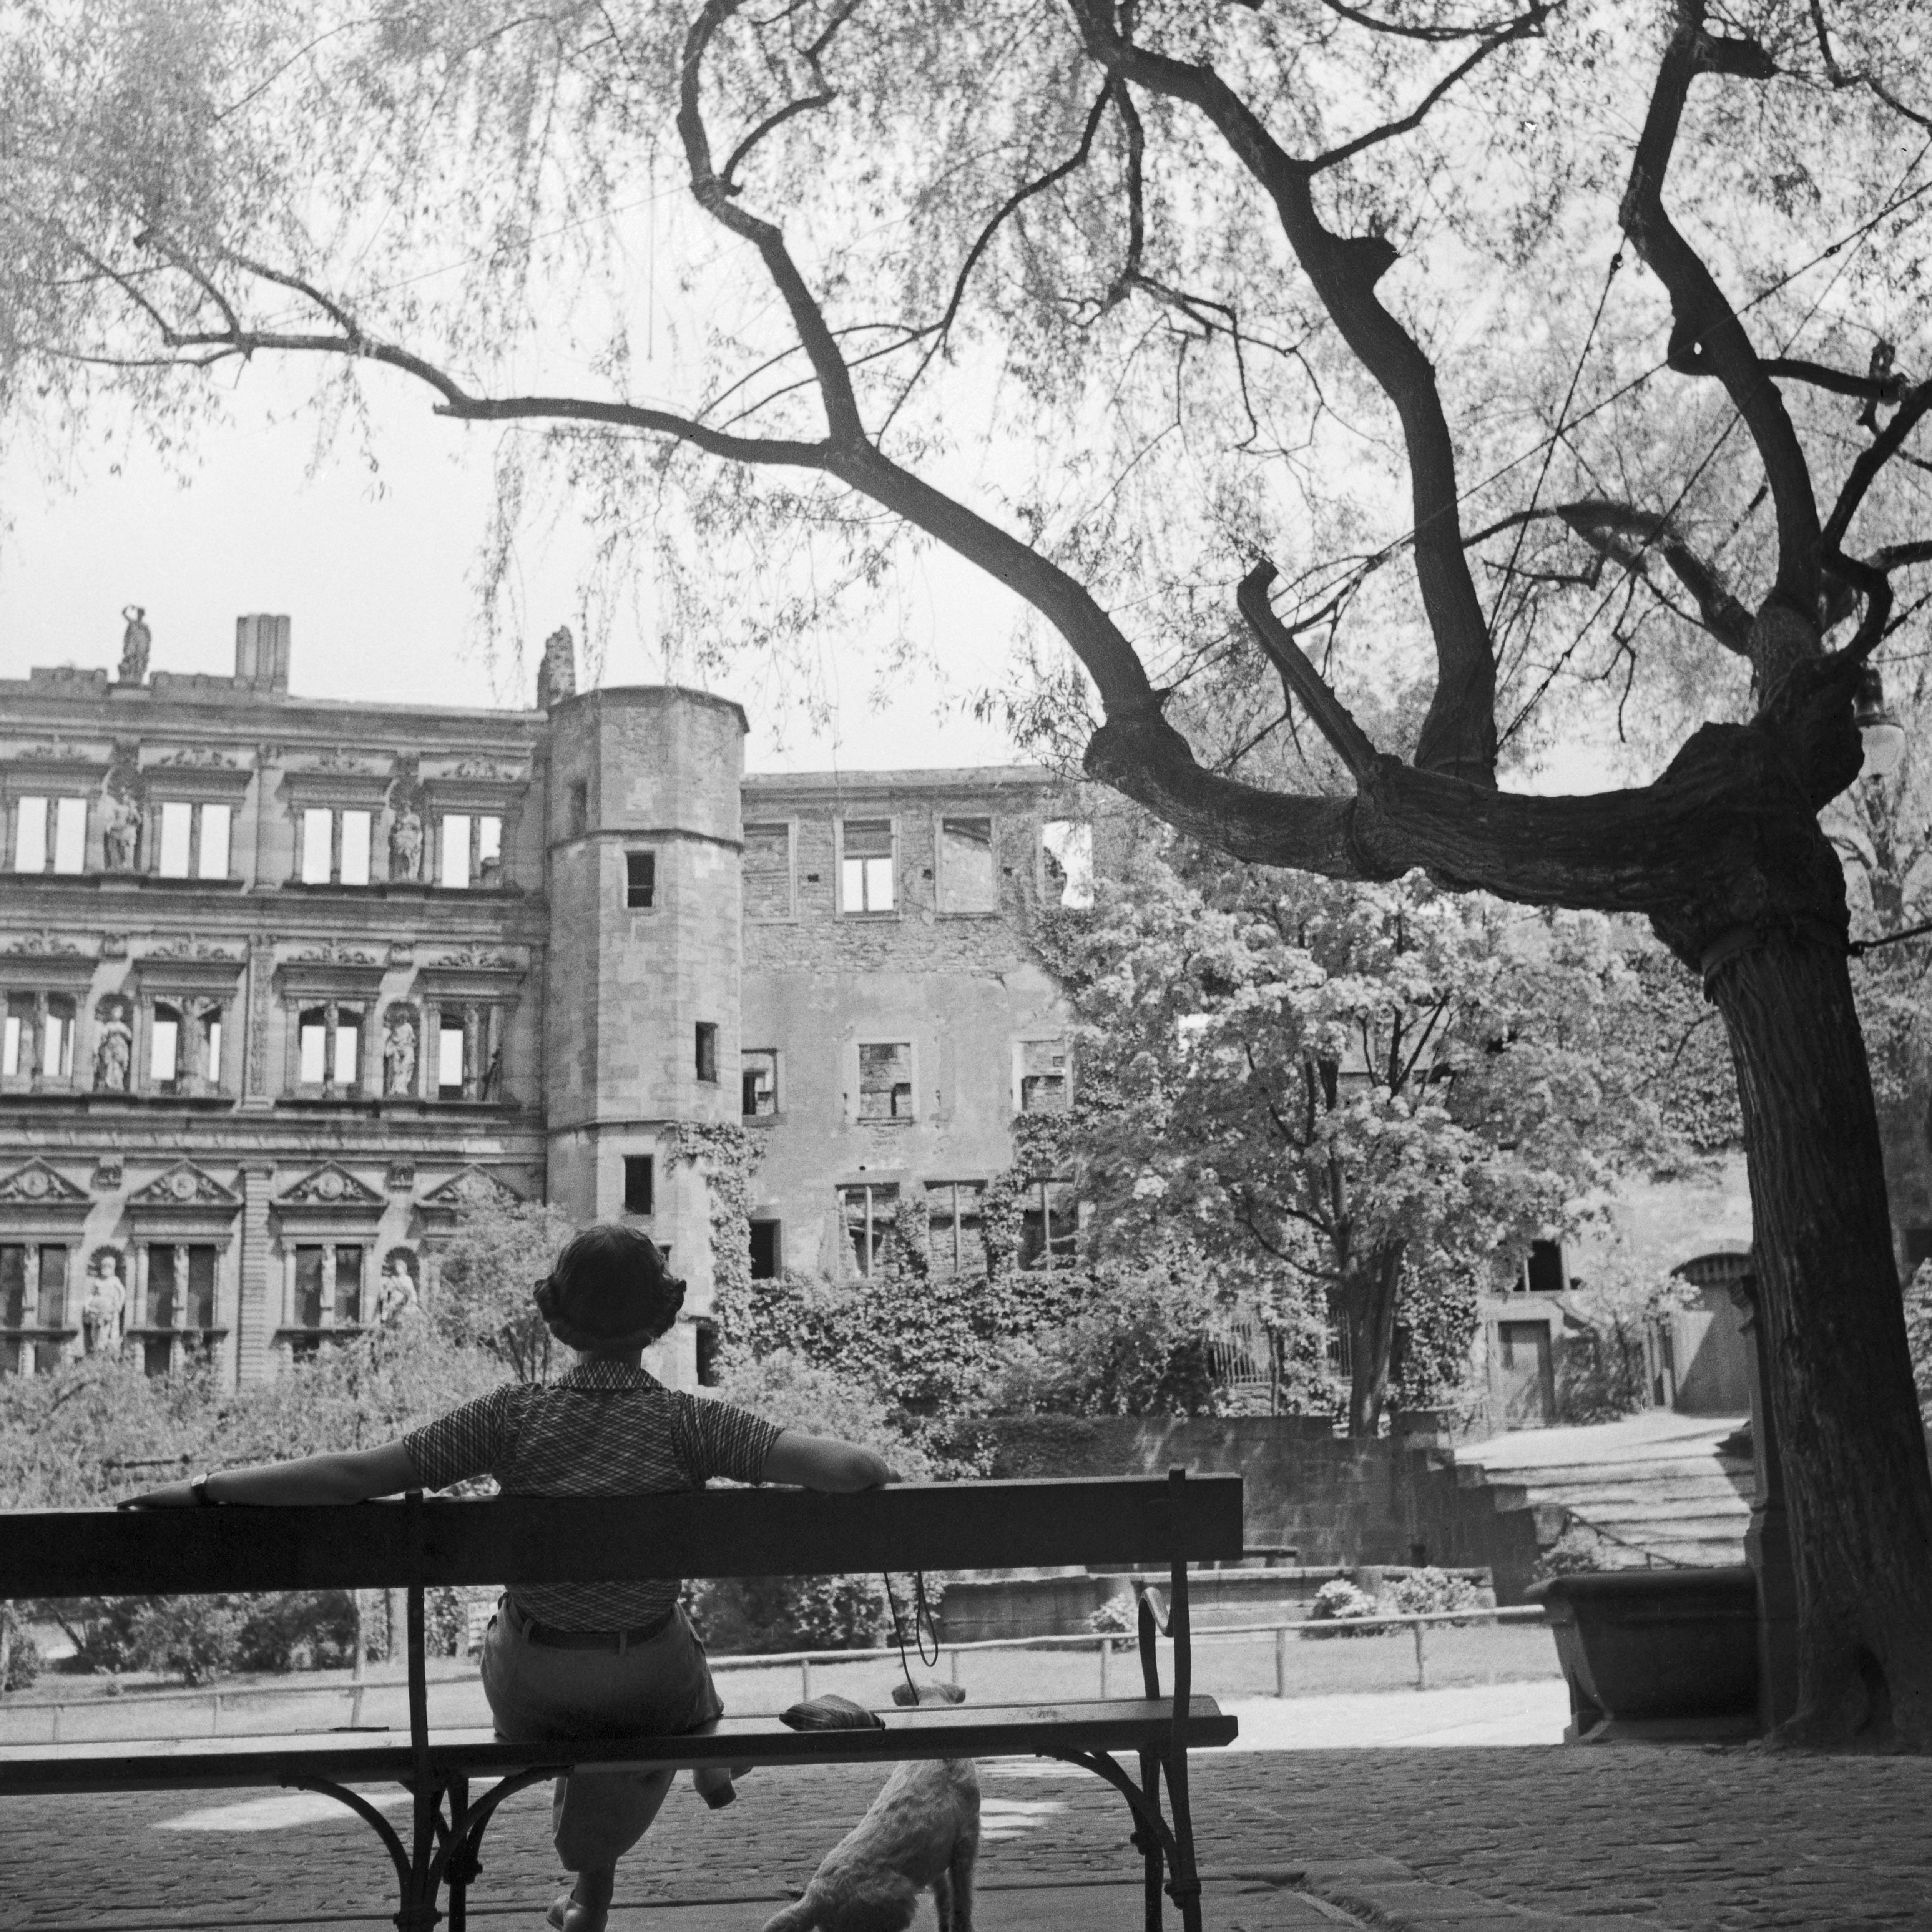 Karl Heinrich Lämmel Black and White Photograph - Woman on bench in front of Heidelberg castle, Germany 1936, Printed Later 